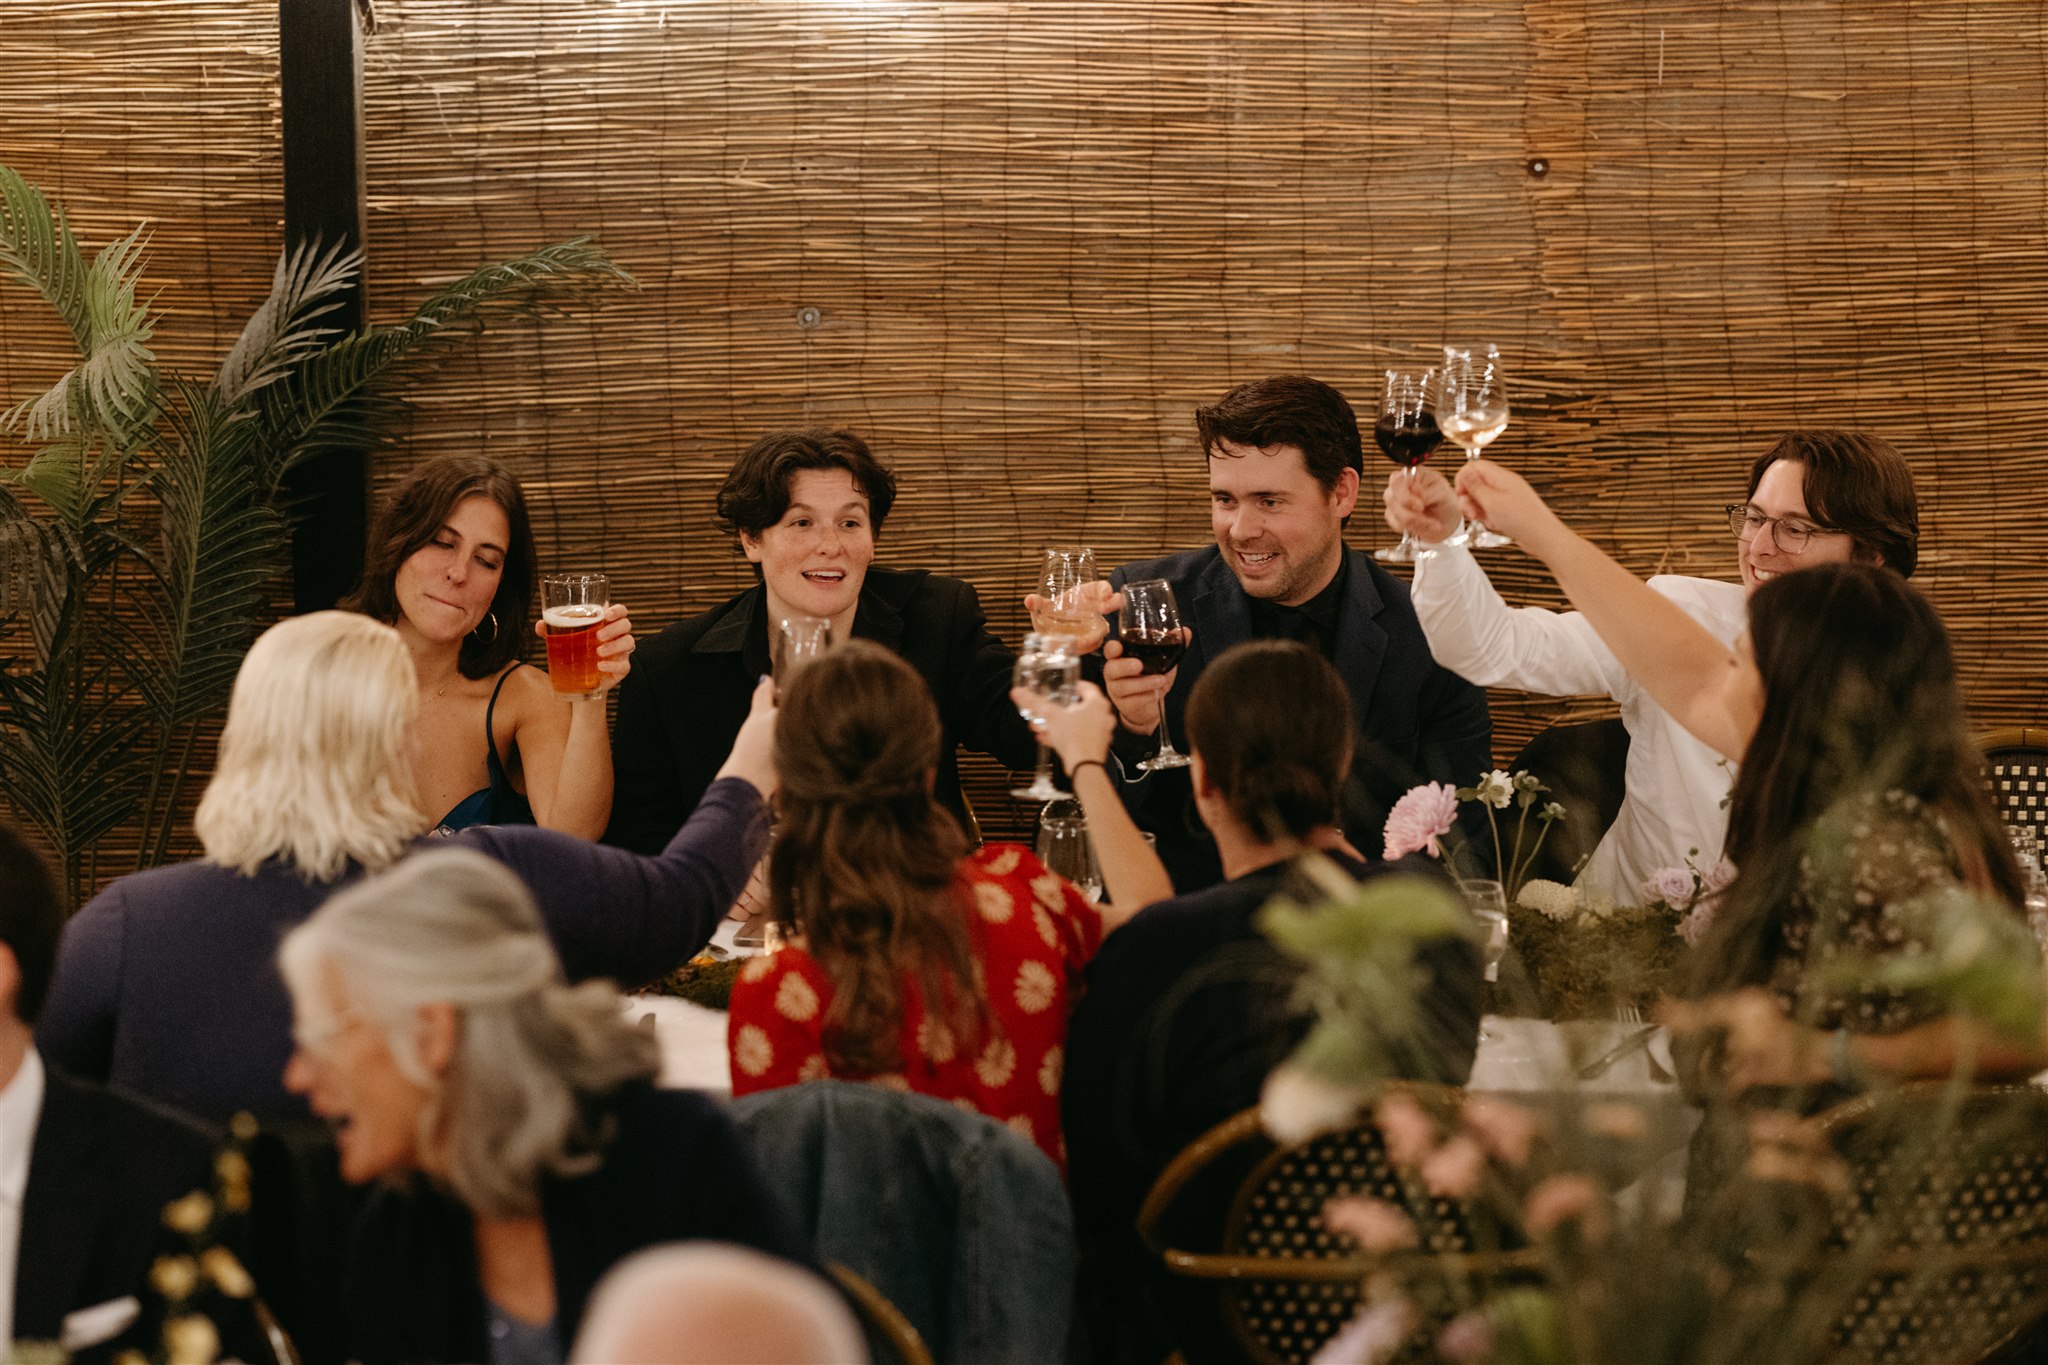 Group of friends toasting with wine glasses at a warmly lit dinner table, laughing and enjoying the evening at an intimate restaurant wedding